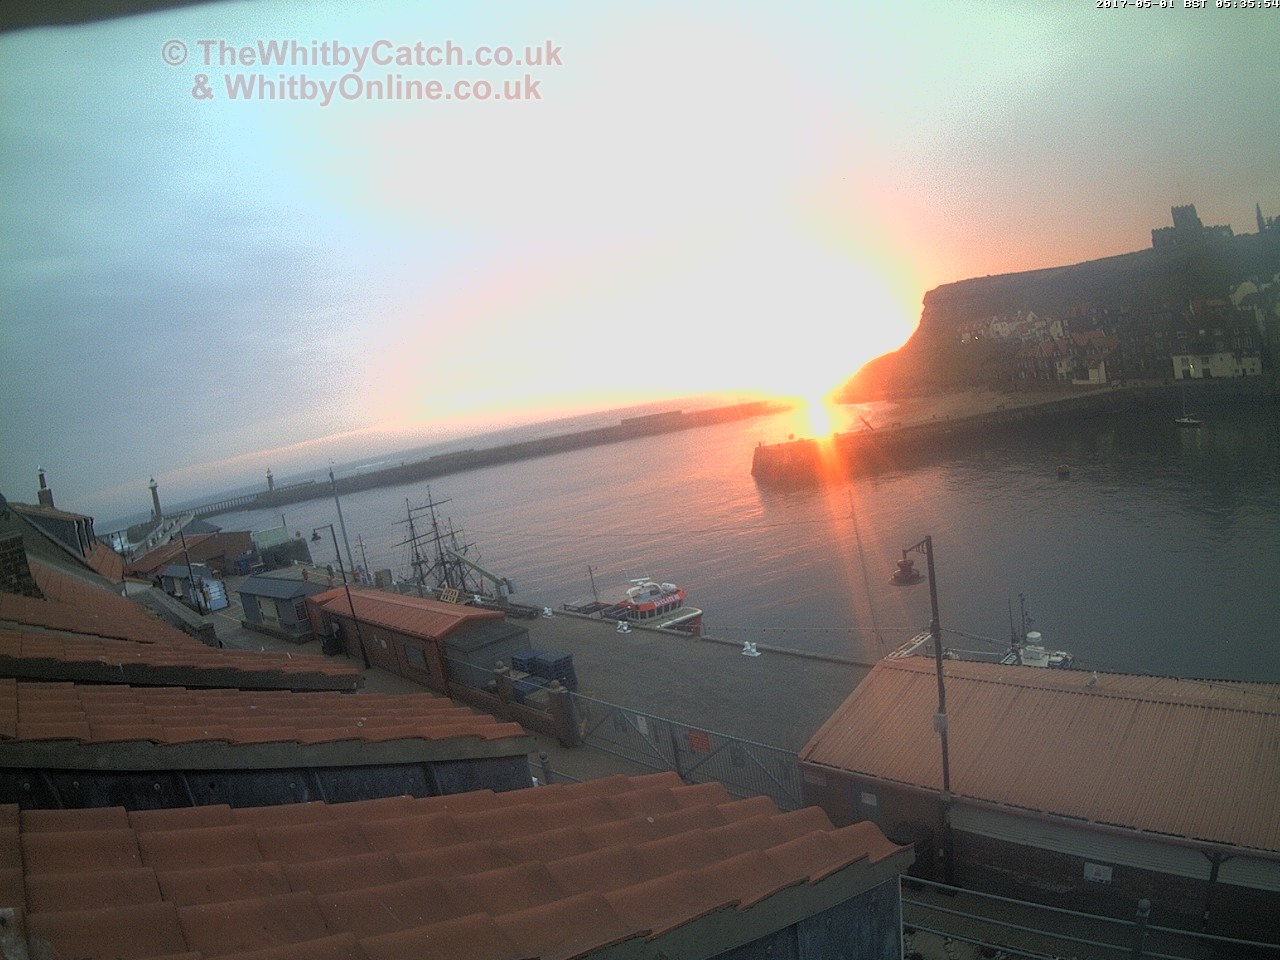 Whitby Mon 1st May 2017 05:36.